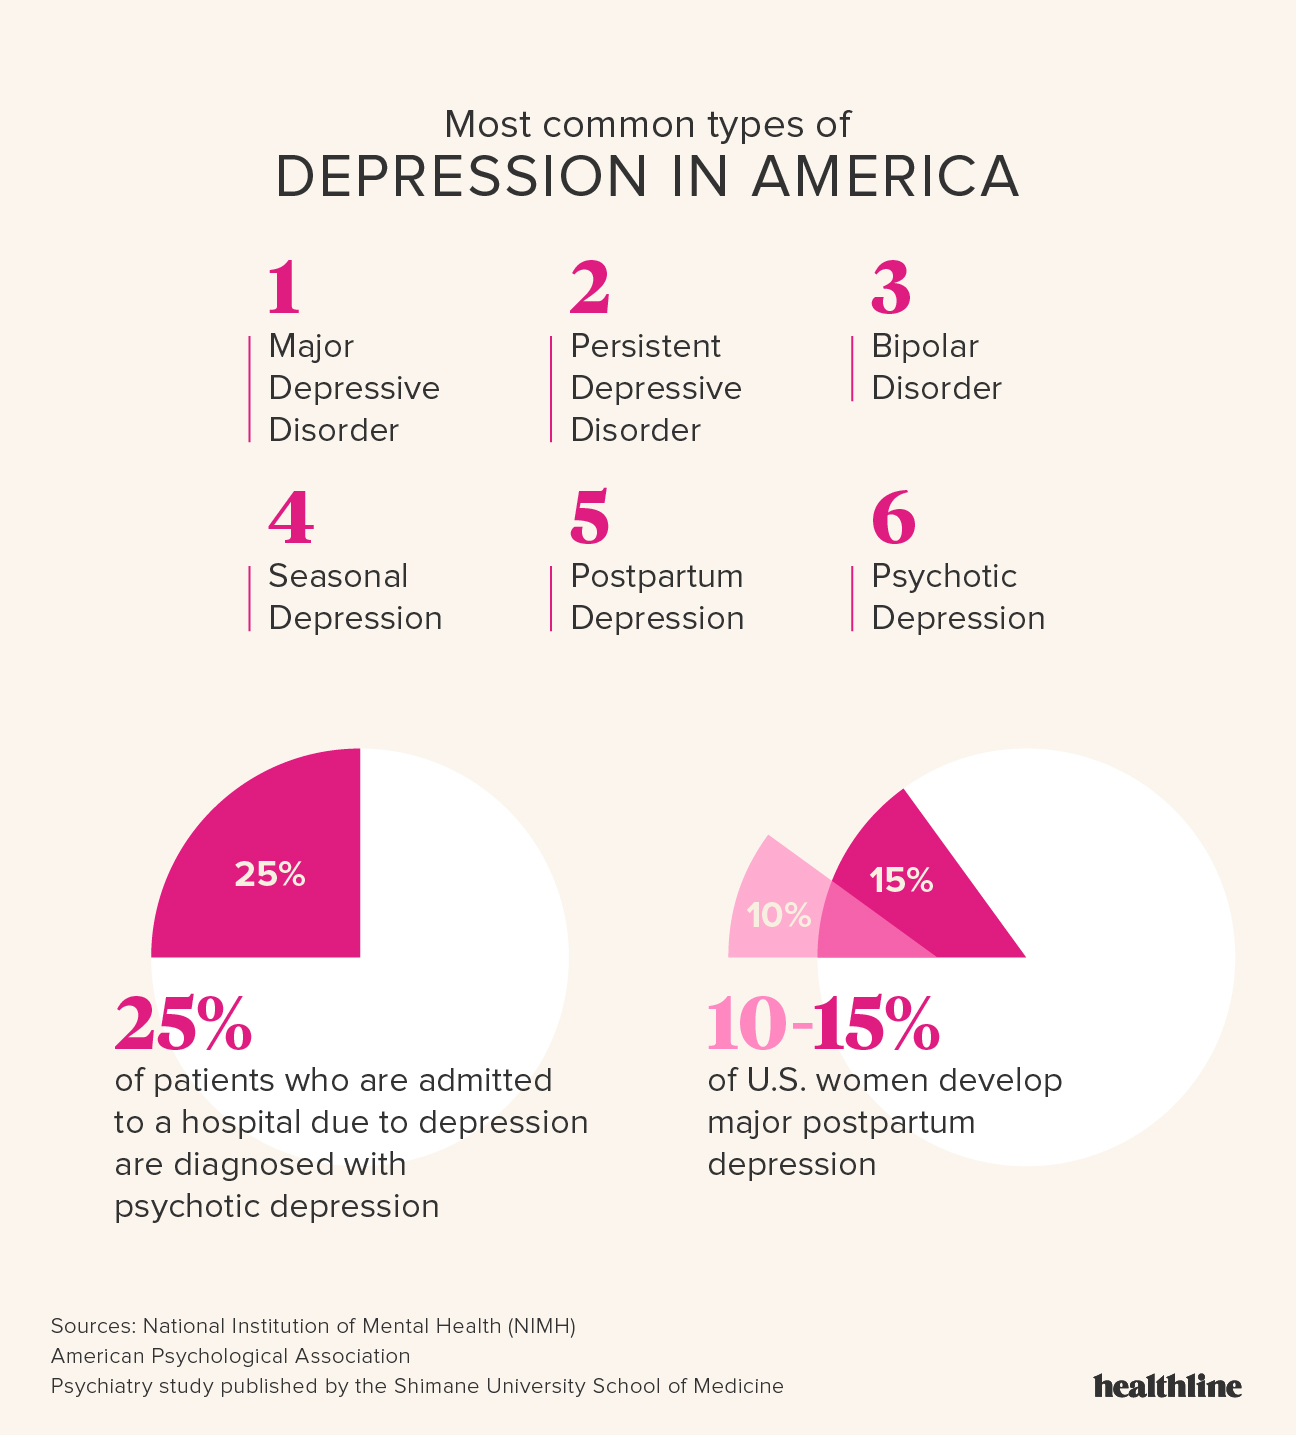 Facts about depression and older adults